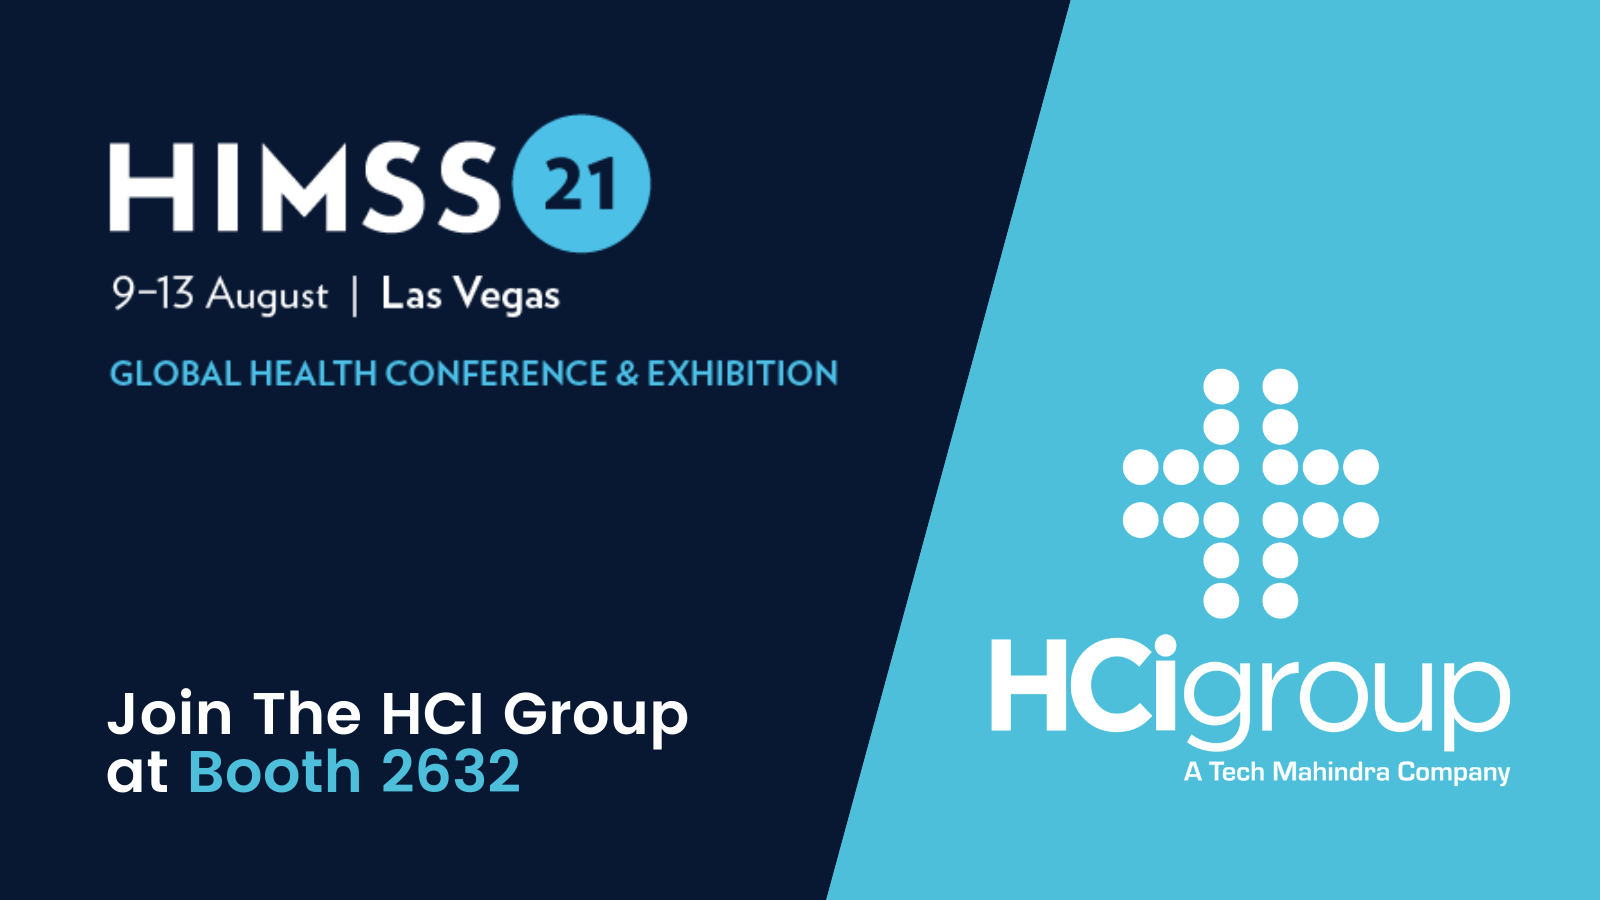 The HCI Group attending HIMSS21 Global Conference